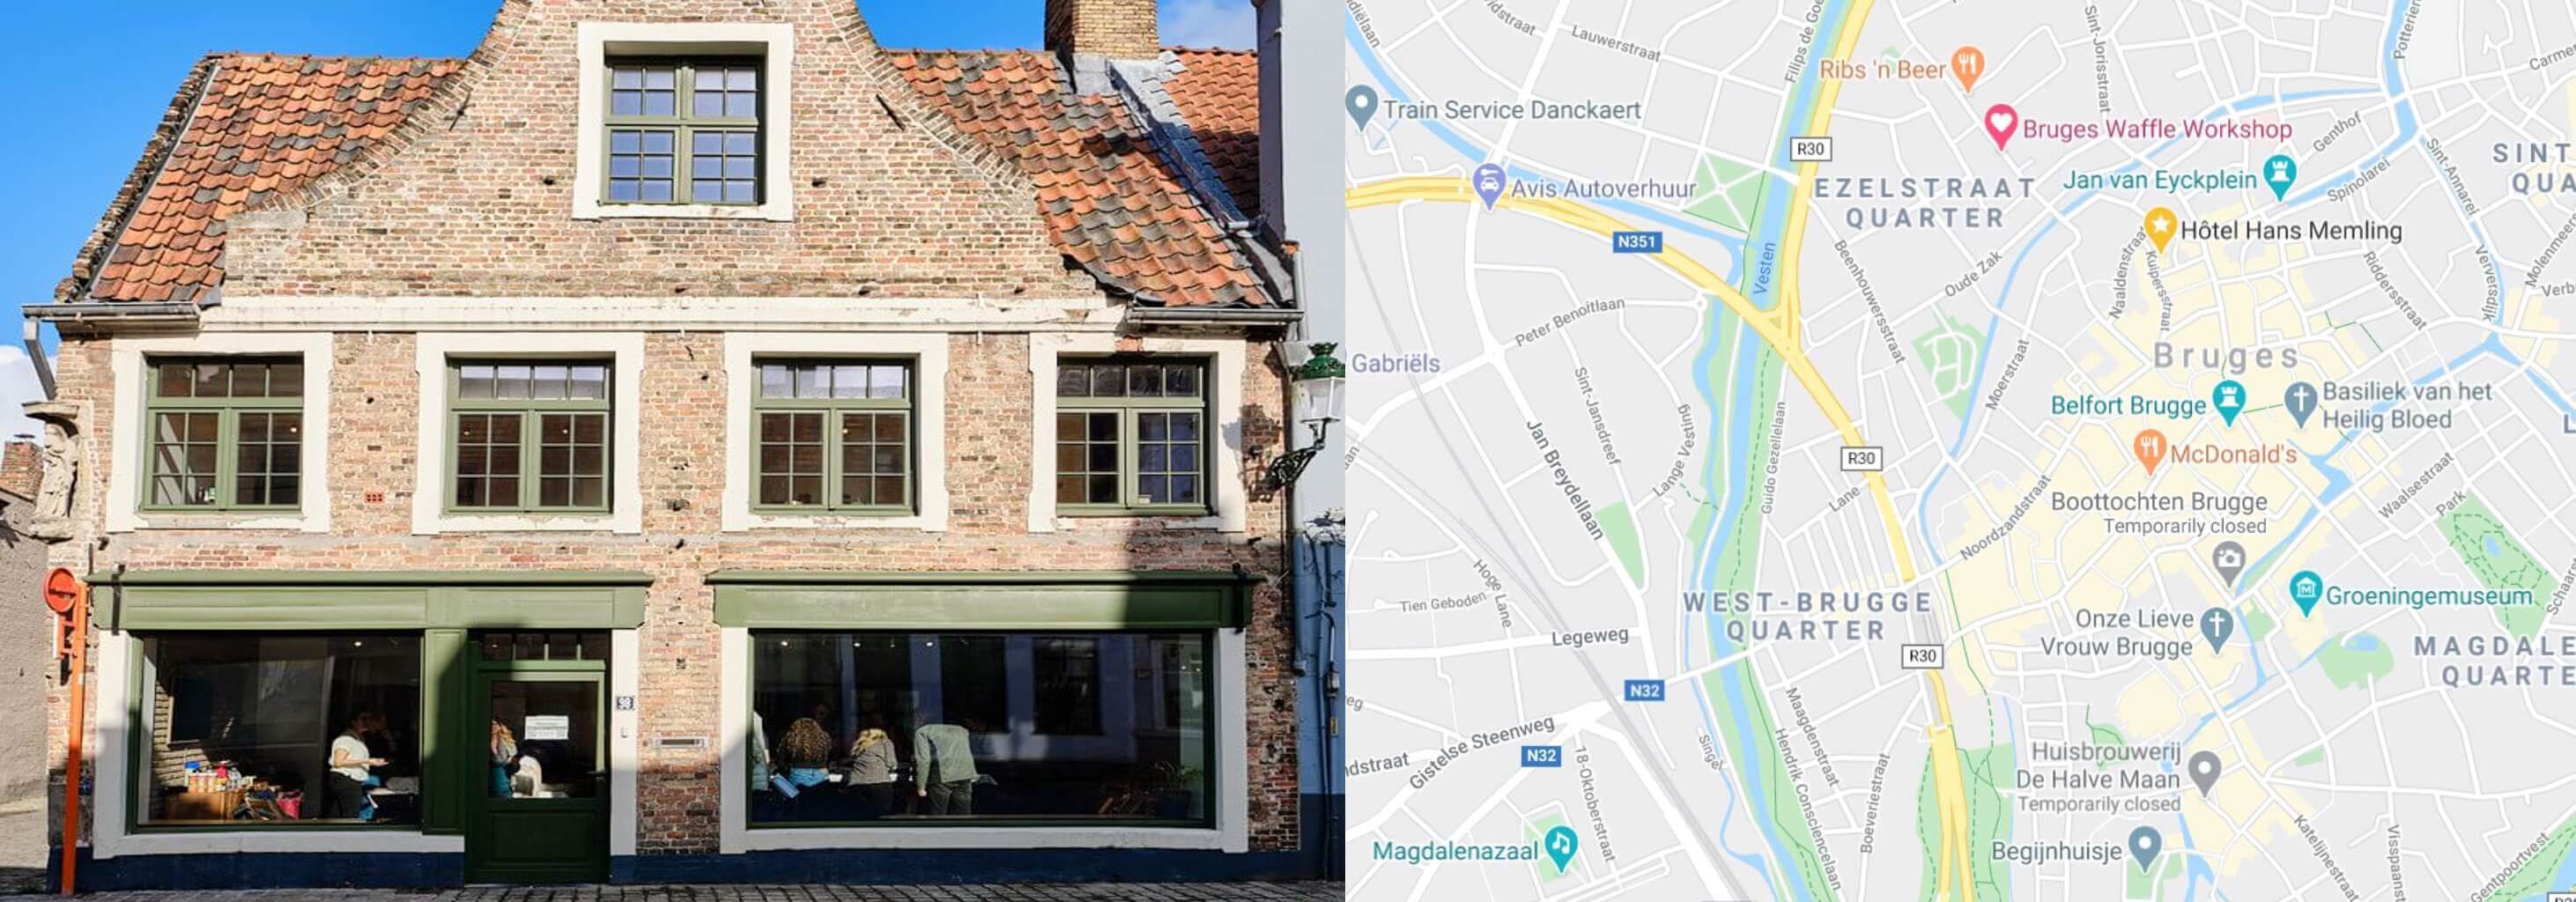 map and picture of the waffle workshop in Bruges, Belgium